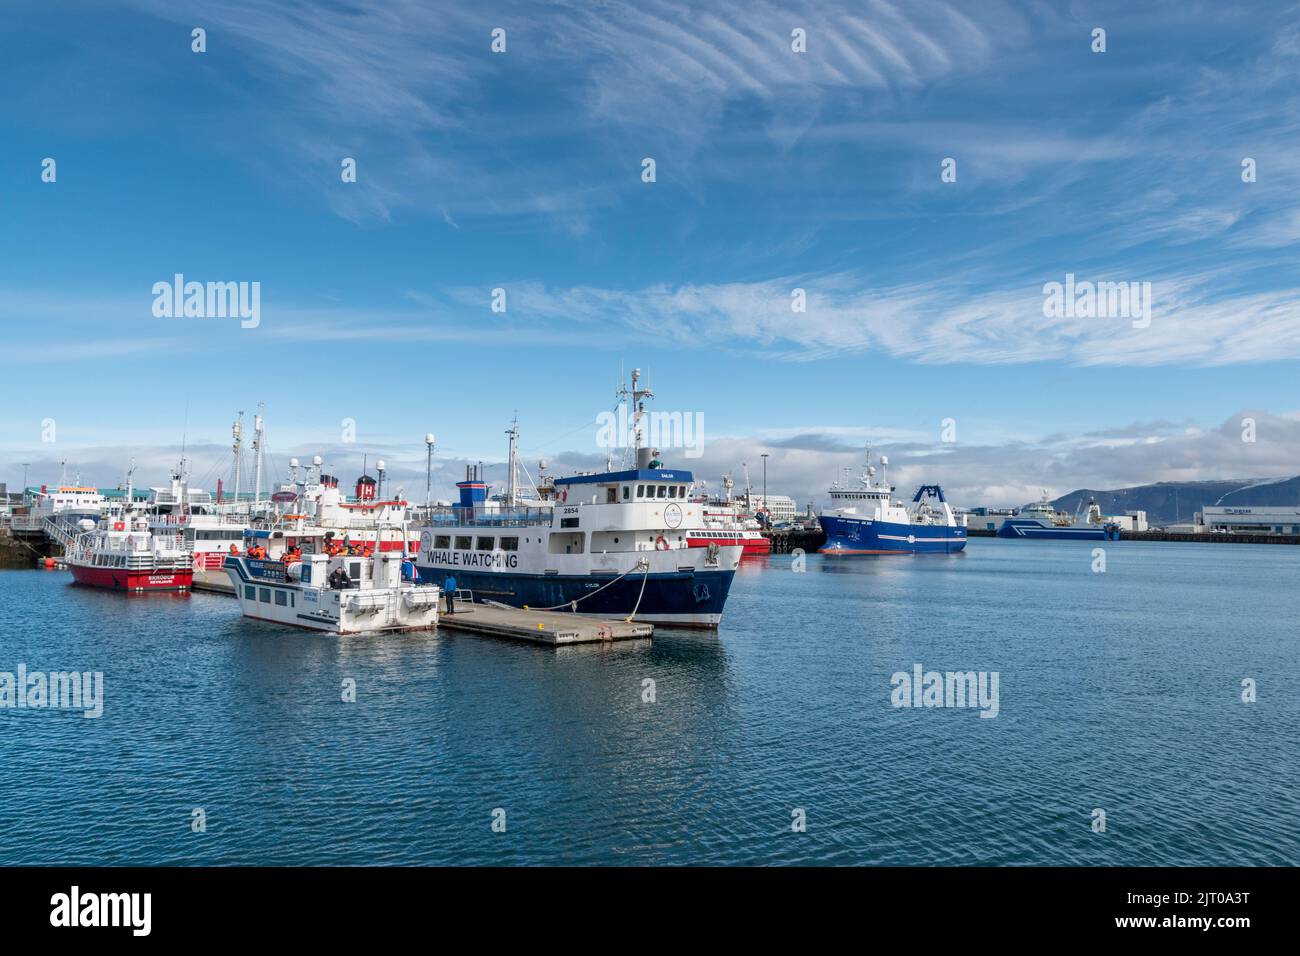 Boats in the Harbour, many taking tourists out on trips, Reykjavik, Iceland Stock Photo